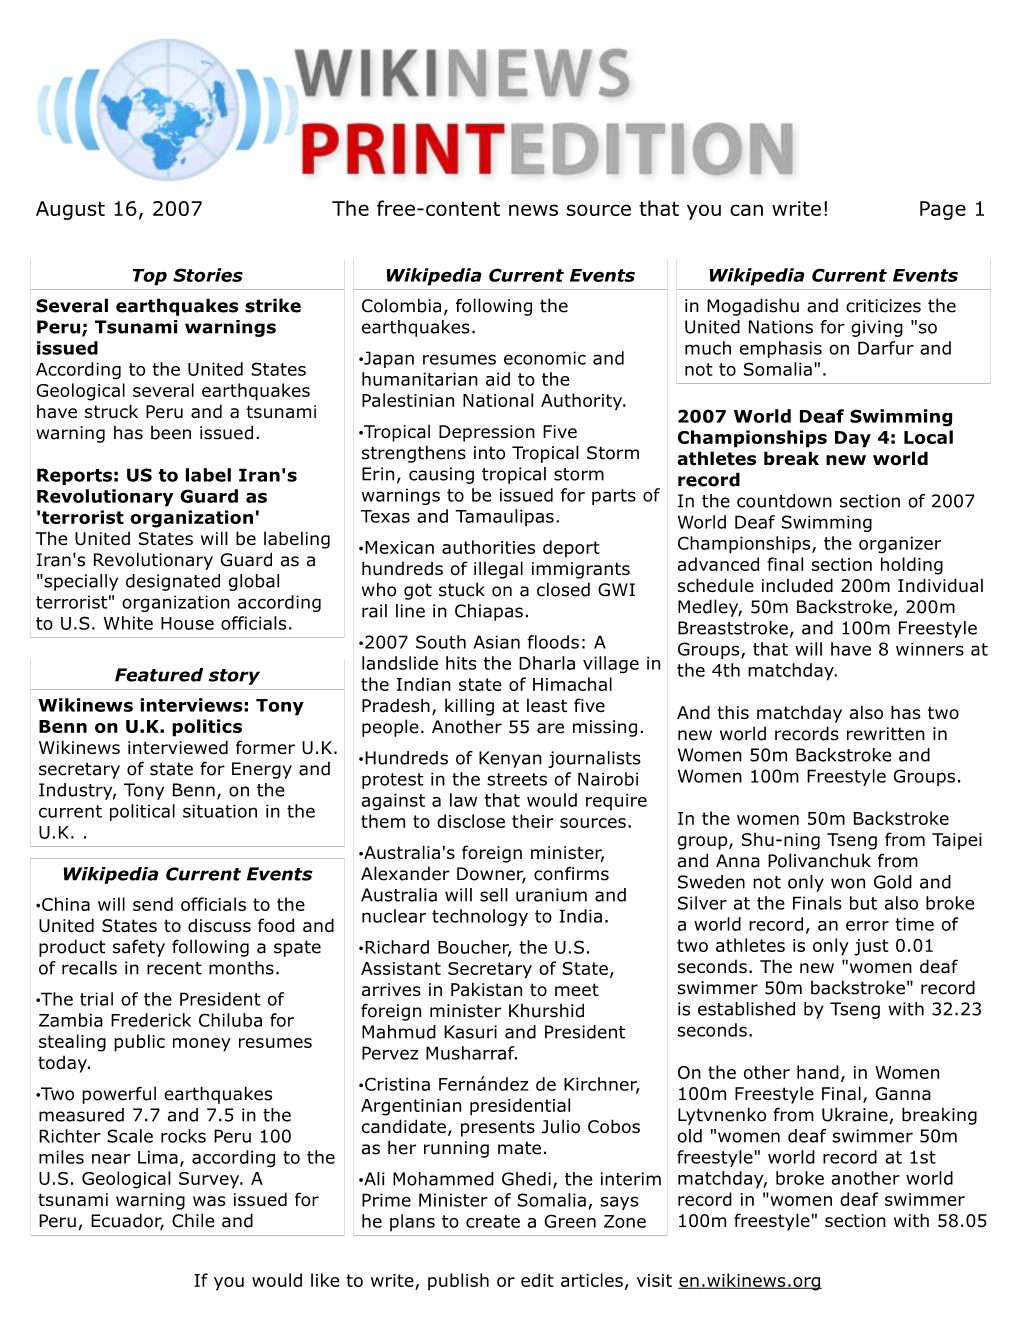 August 16, 2007 the Free-Content News Source That You Can Write! Page 1